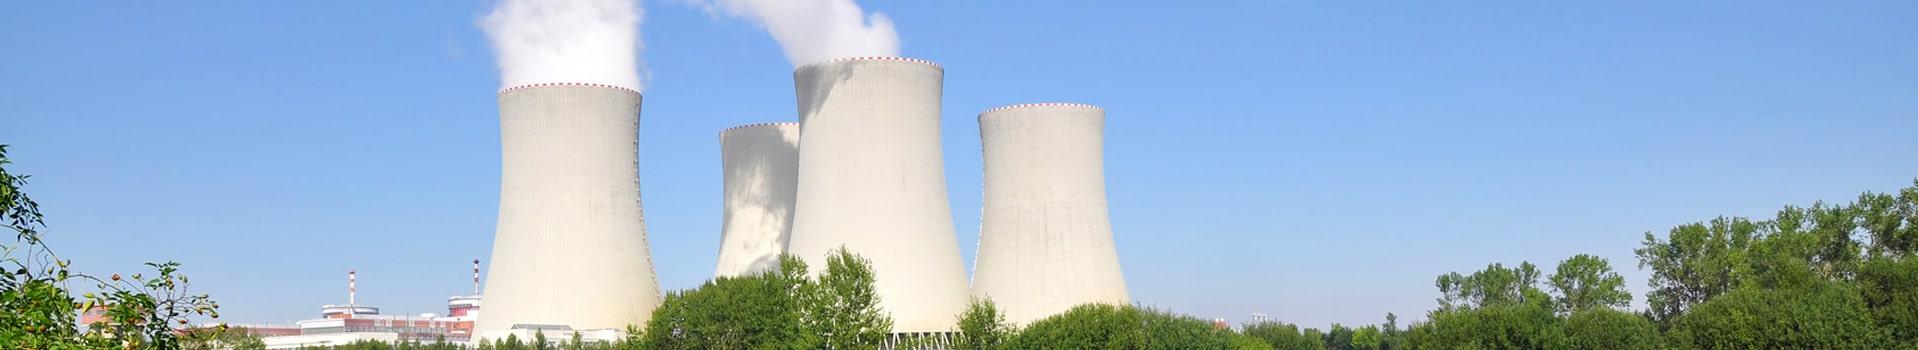 nuclear power plant fall protection systems